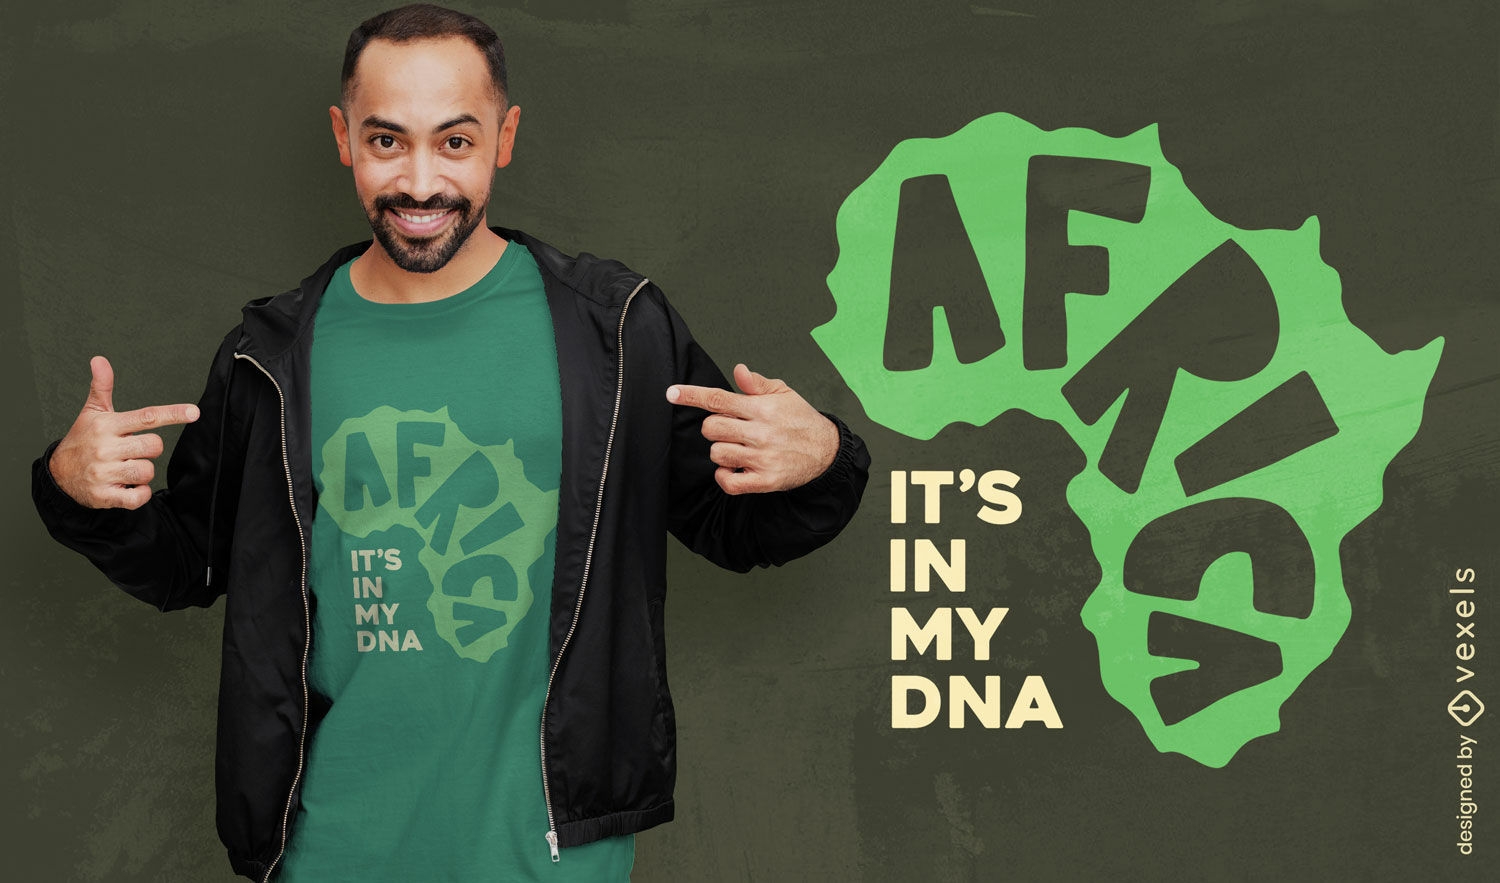 Africa it's in my DNA t-shirt design